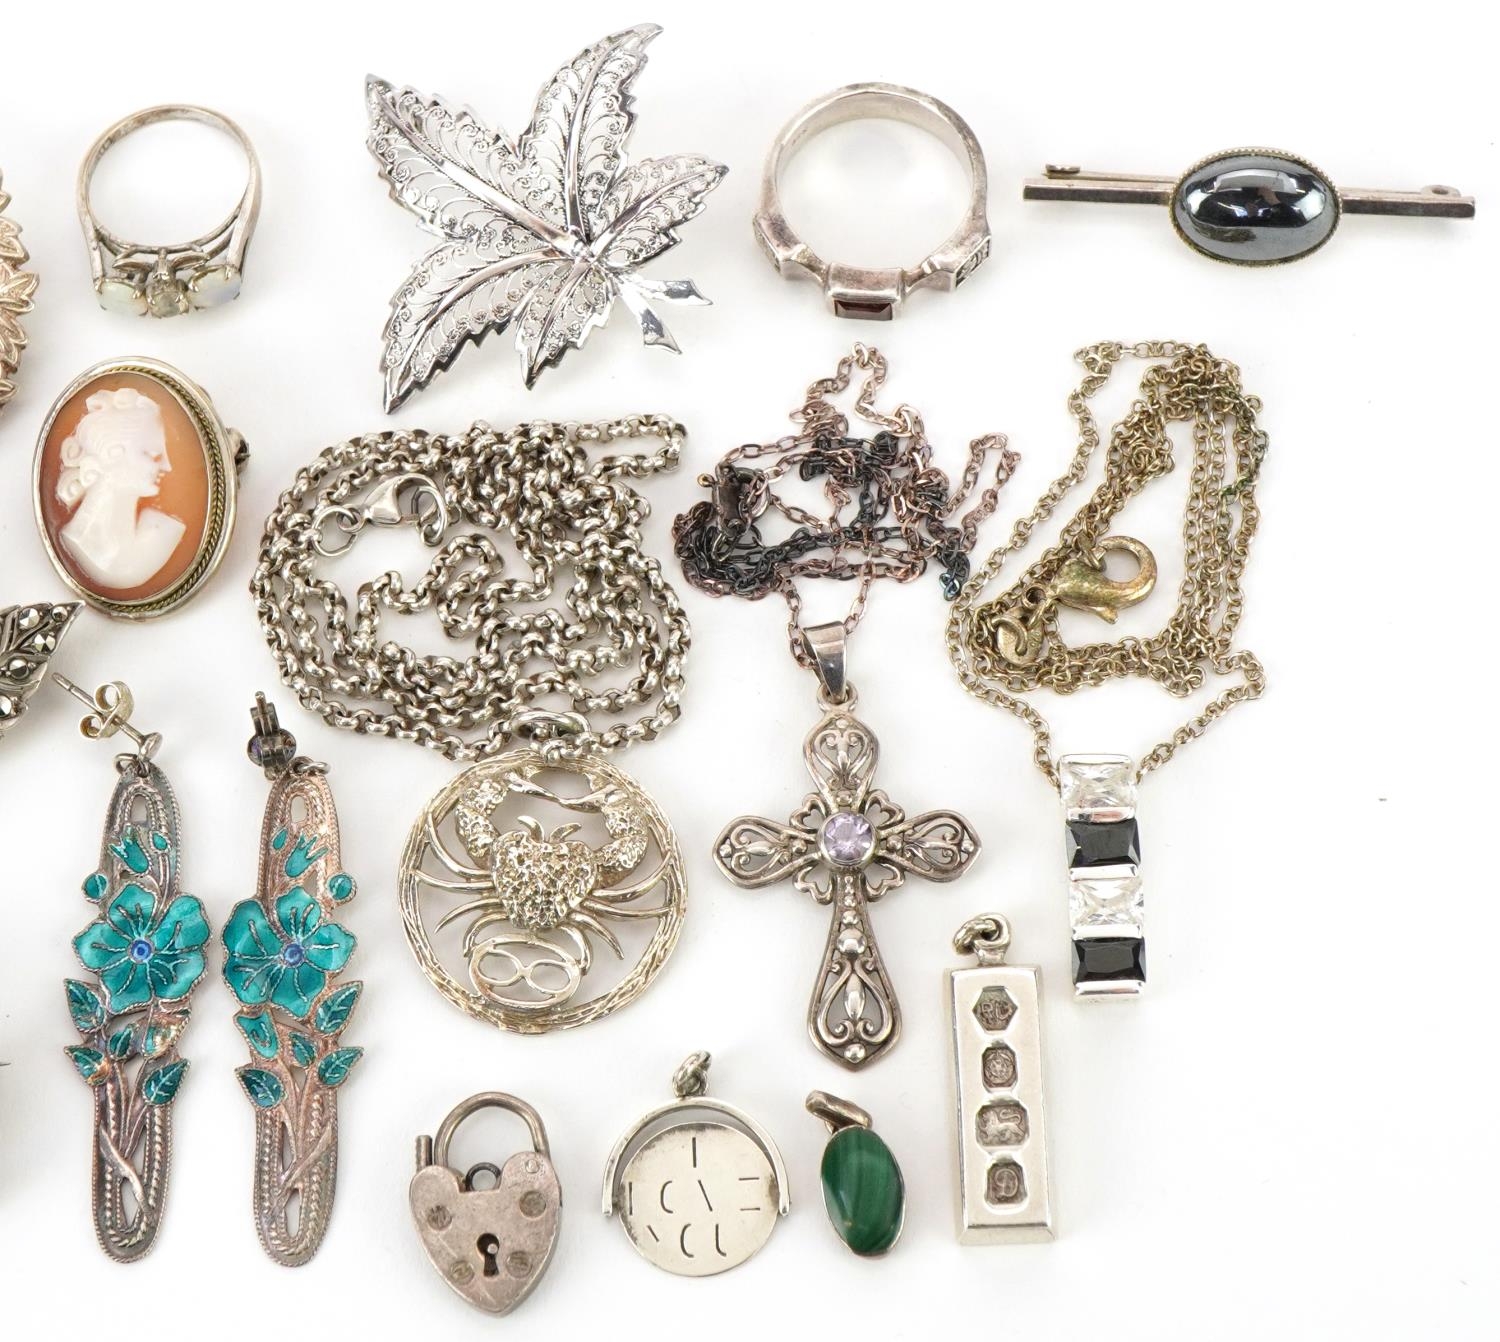 Silver jewellery including marcasite brooches, pair of scorpion earrings, I Love You spinner charm - Image 3 of 4